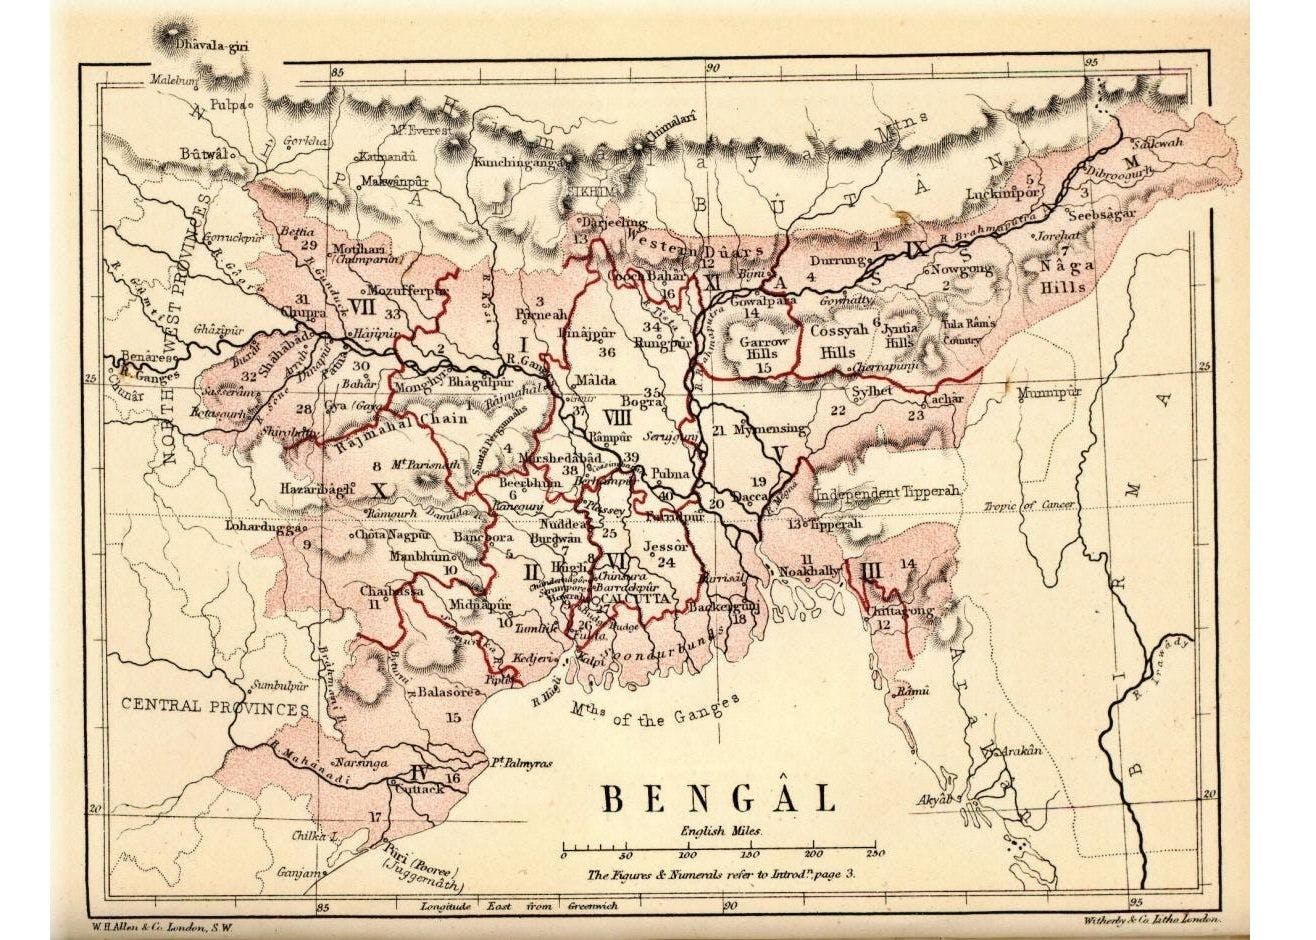 Bengal under the East India Company in 1770 